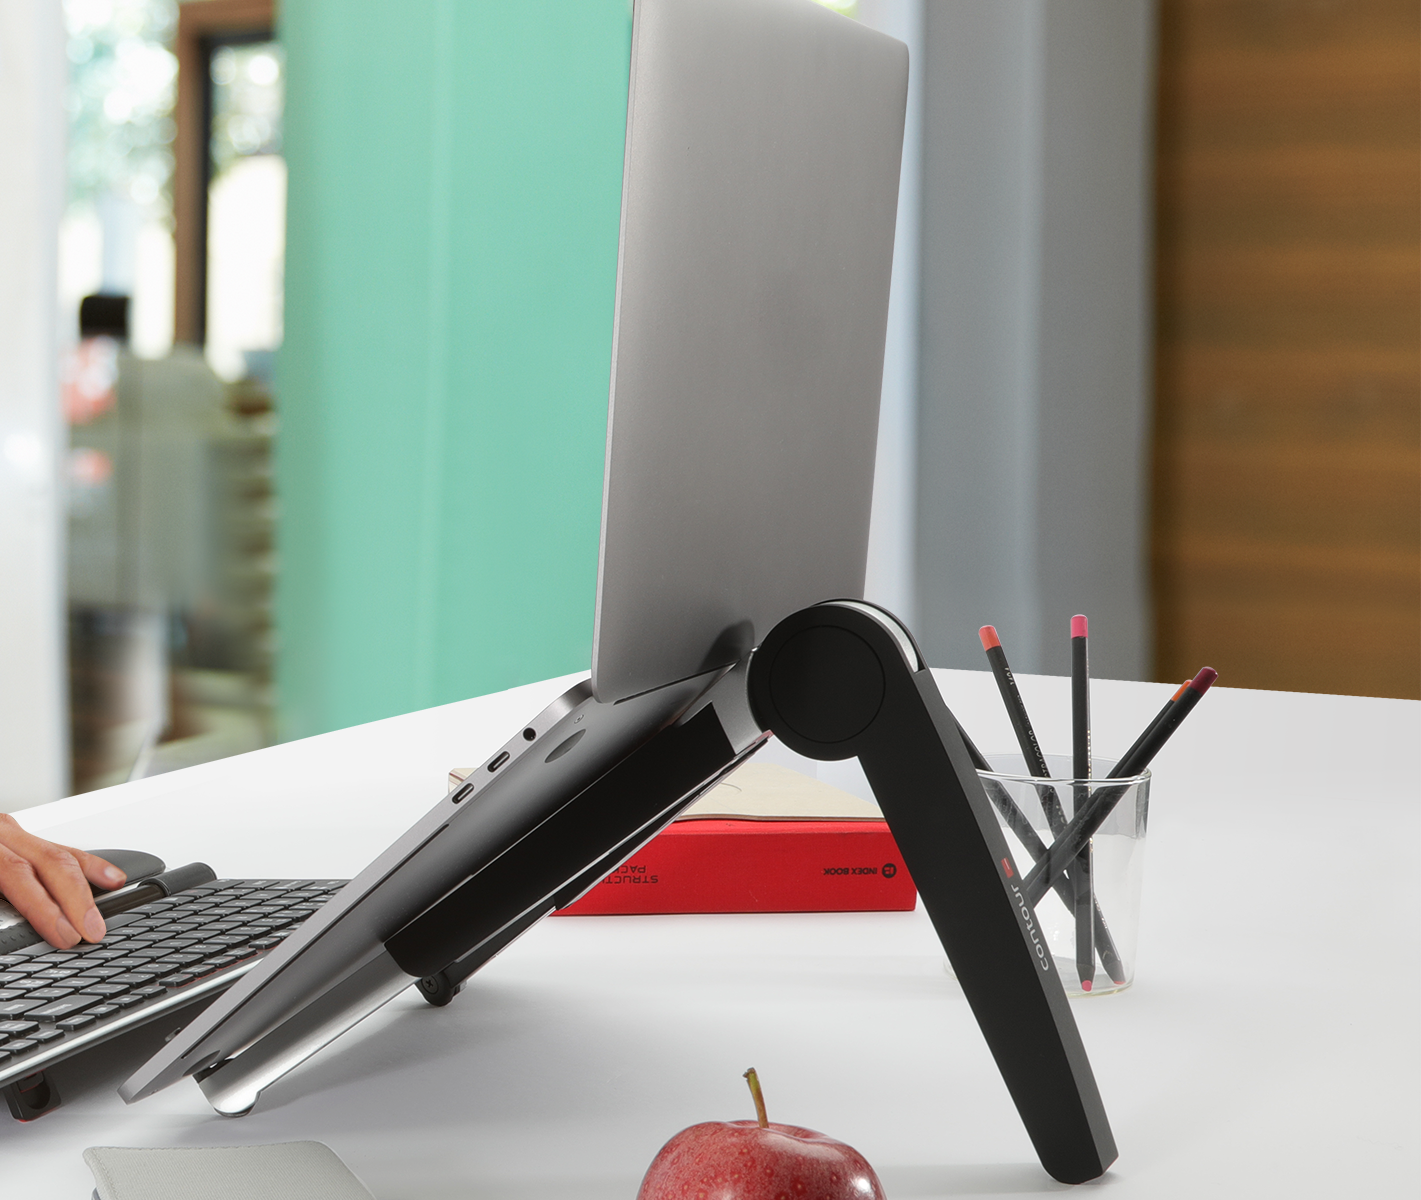 World's Most Compact Laptop Stand